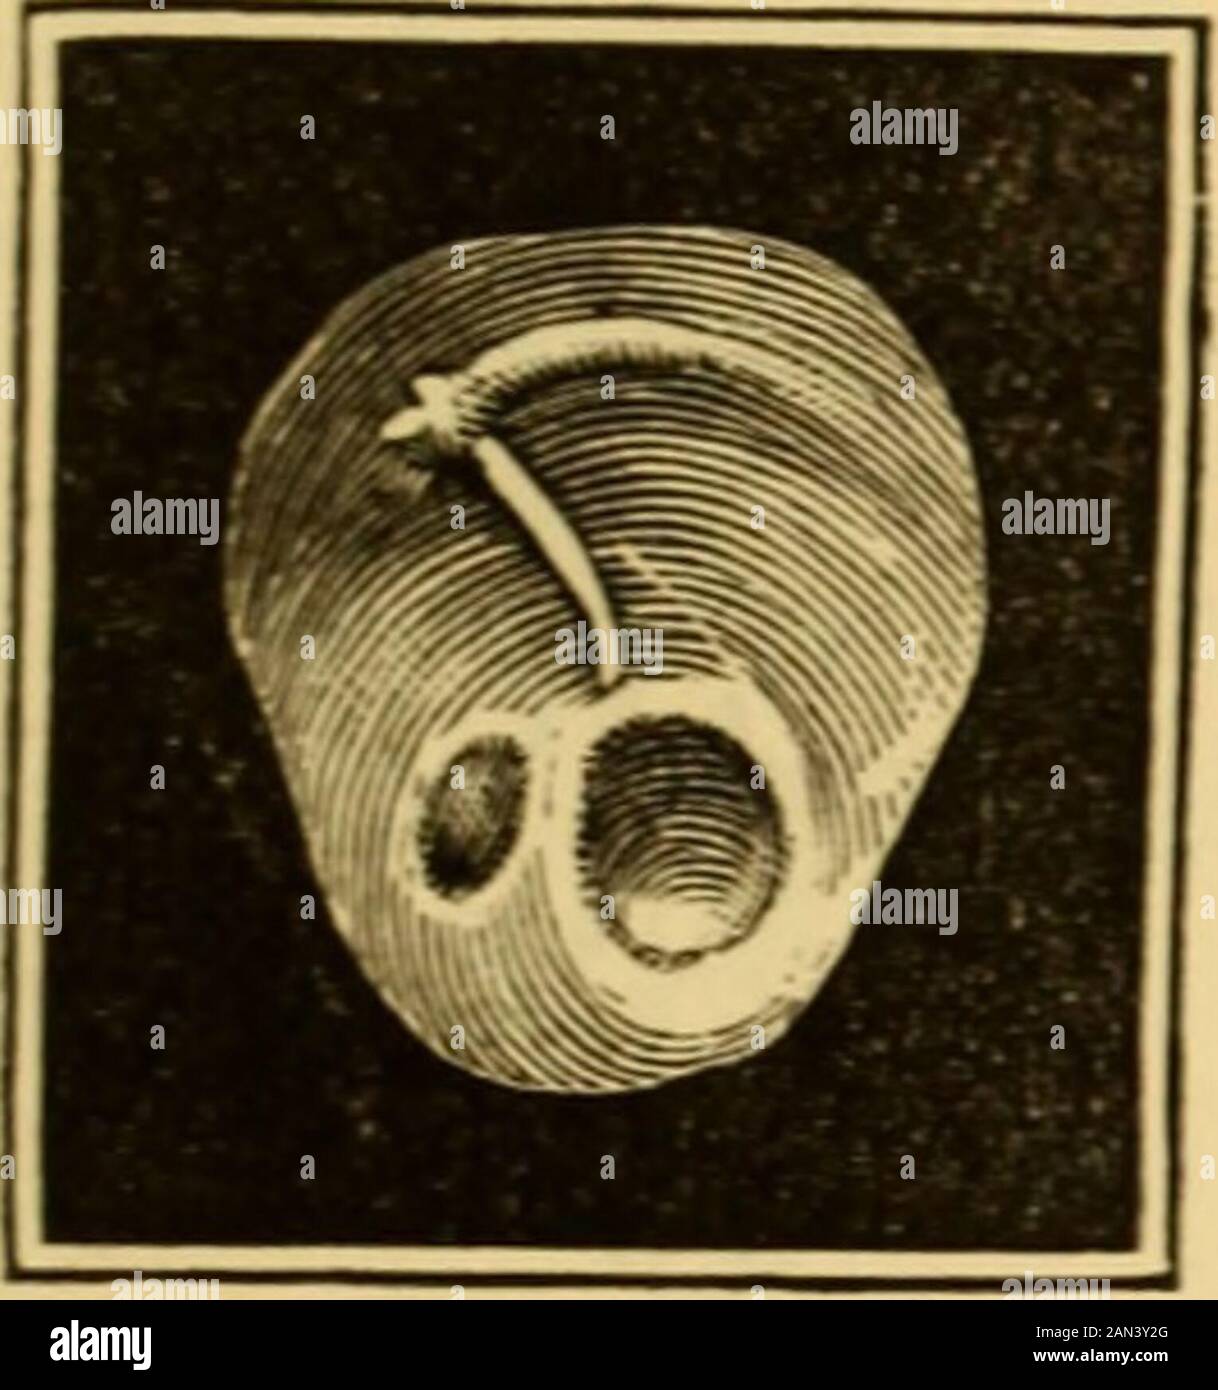 A text-book of the diseases of the ear and adjacent organs . dherent, lay inside of this. The detachment of the handle of the malleus can only be diagnosed in theliving if the upper part of the handle is in its proper position, while the navelof the membrane is very much flattened, and shows excessive movement with ADHERENT CICATRICES ON THE MEMBBANA TYMPANI. 379 Siegles speculum. That by detachment of the handle of the malleus thetransmission of sound from the membrane to the ossicula is much diminished,is self-evident. 2. Adherent Cicatrices ; Adhesion between the Membrana Tympaniand the Inn Stock Photo